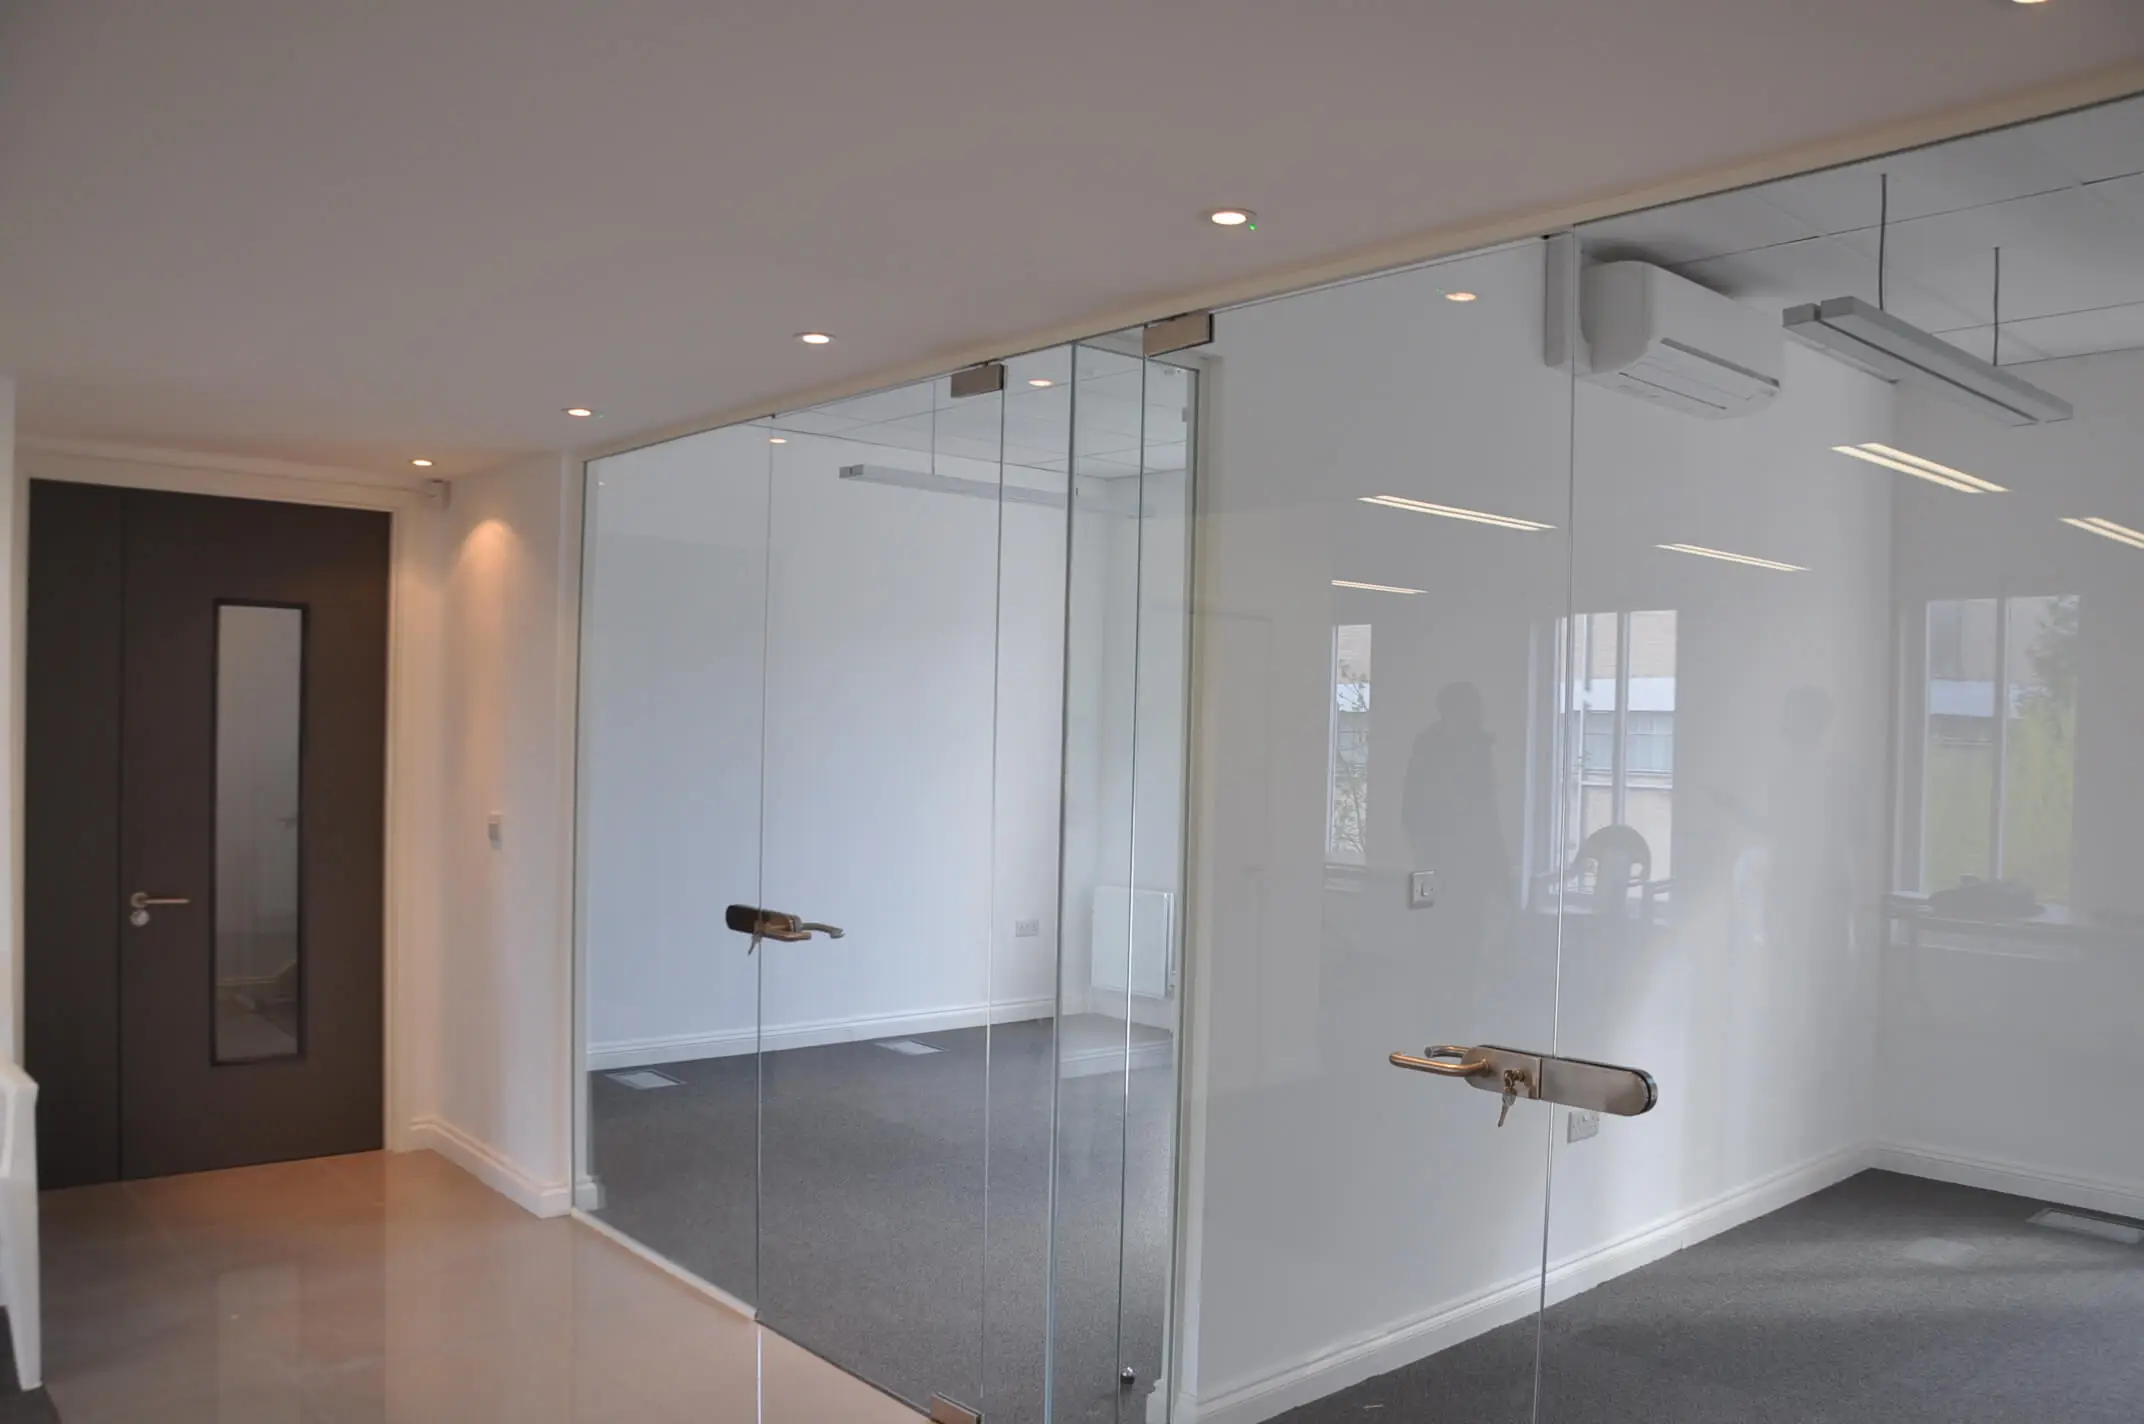 WorldSim Office space with single glazed frameless glass partitions